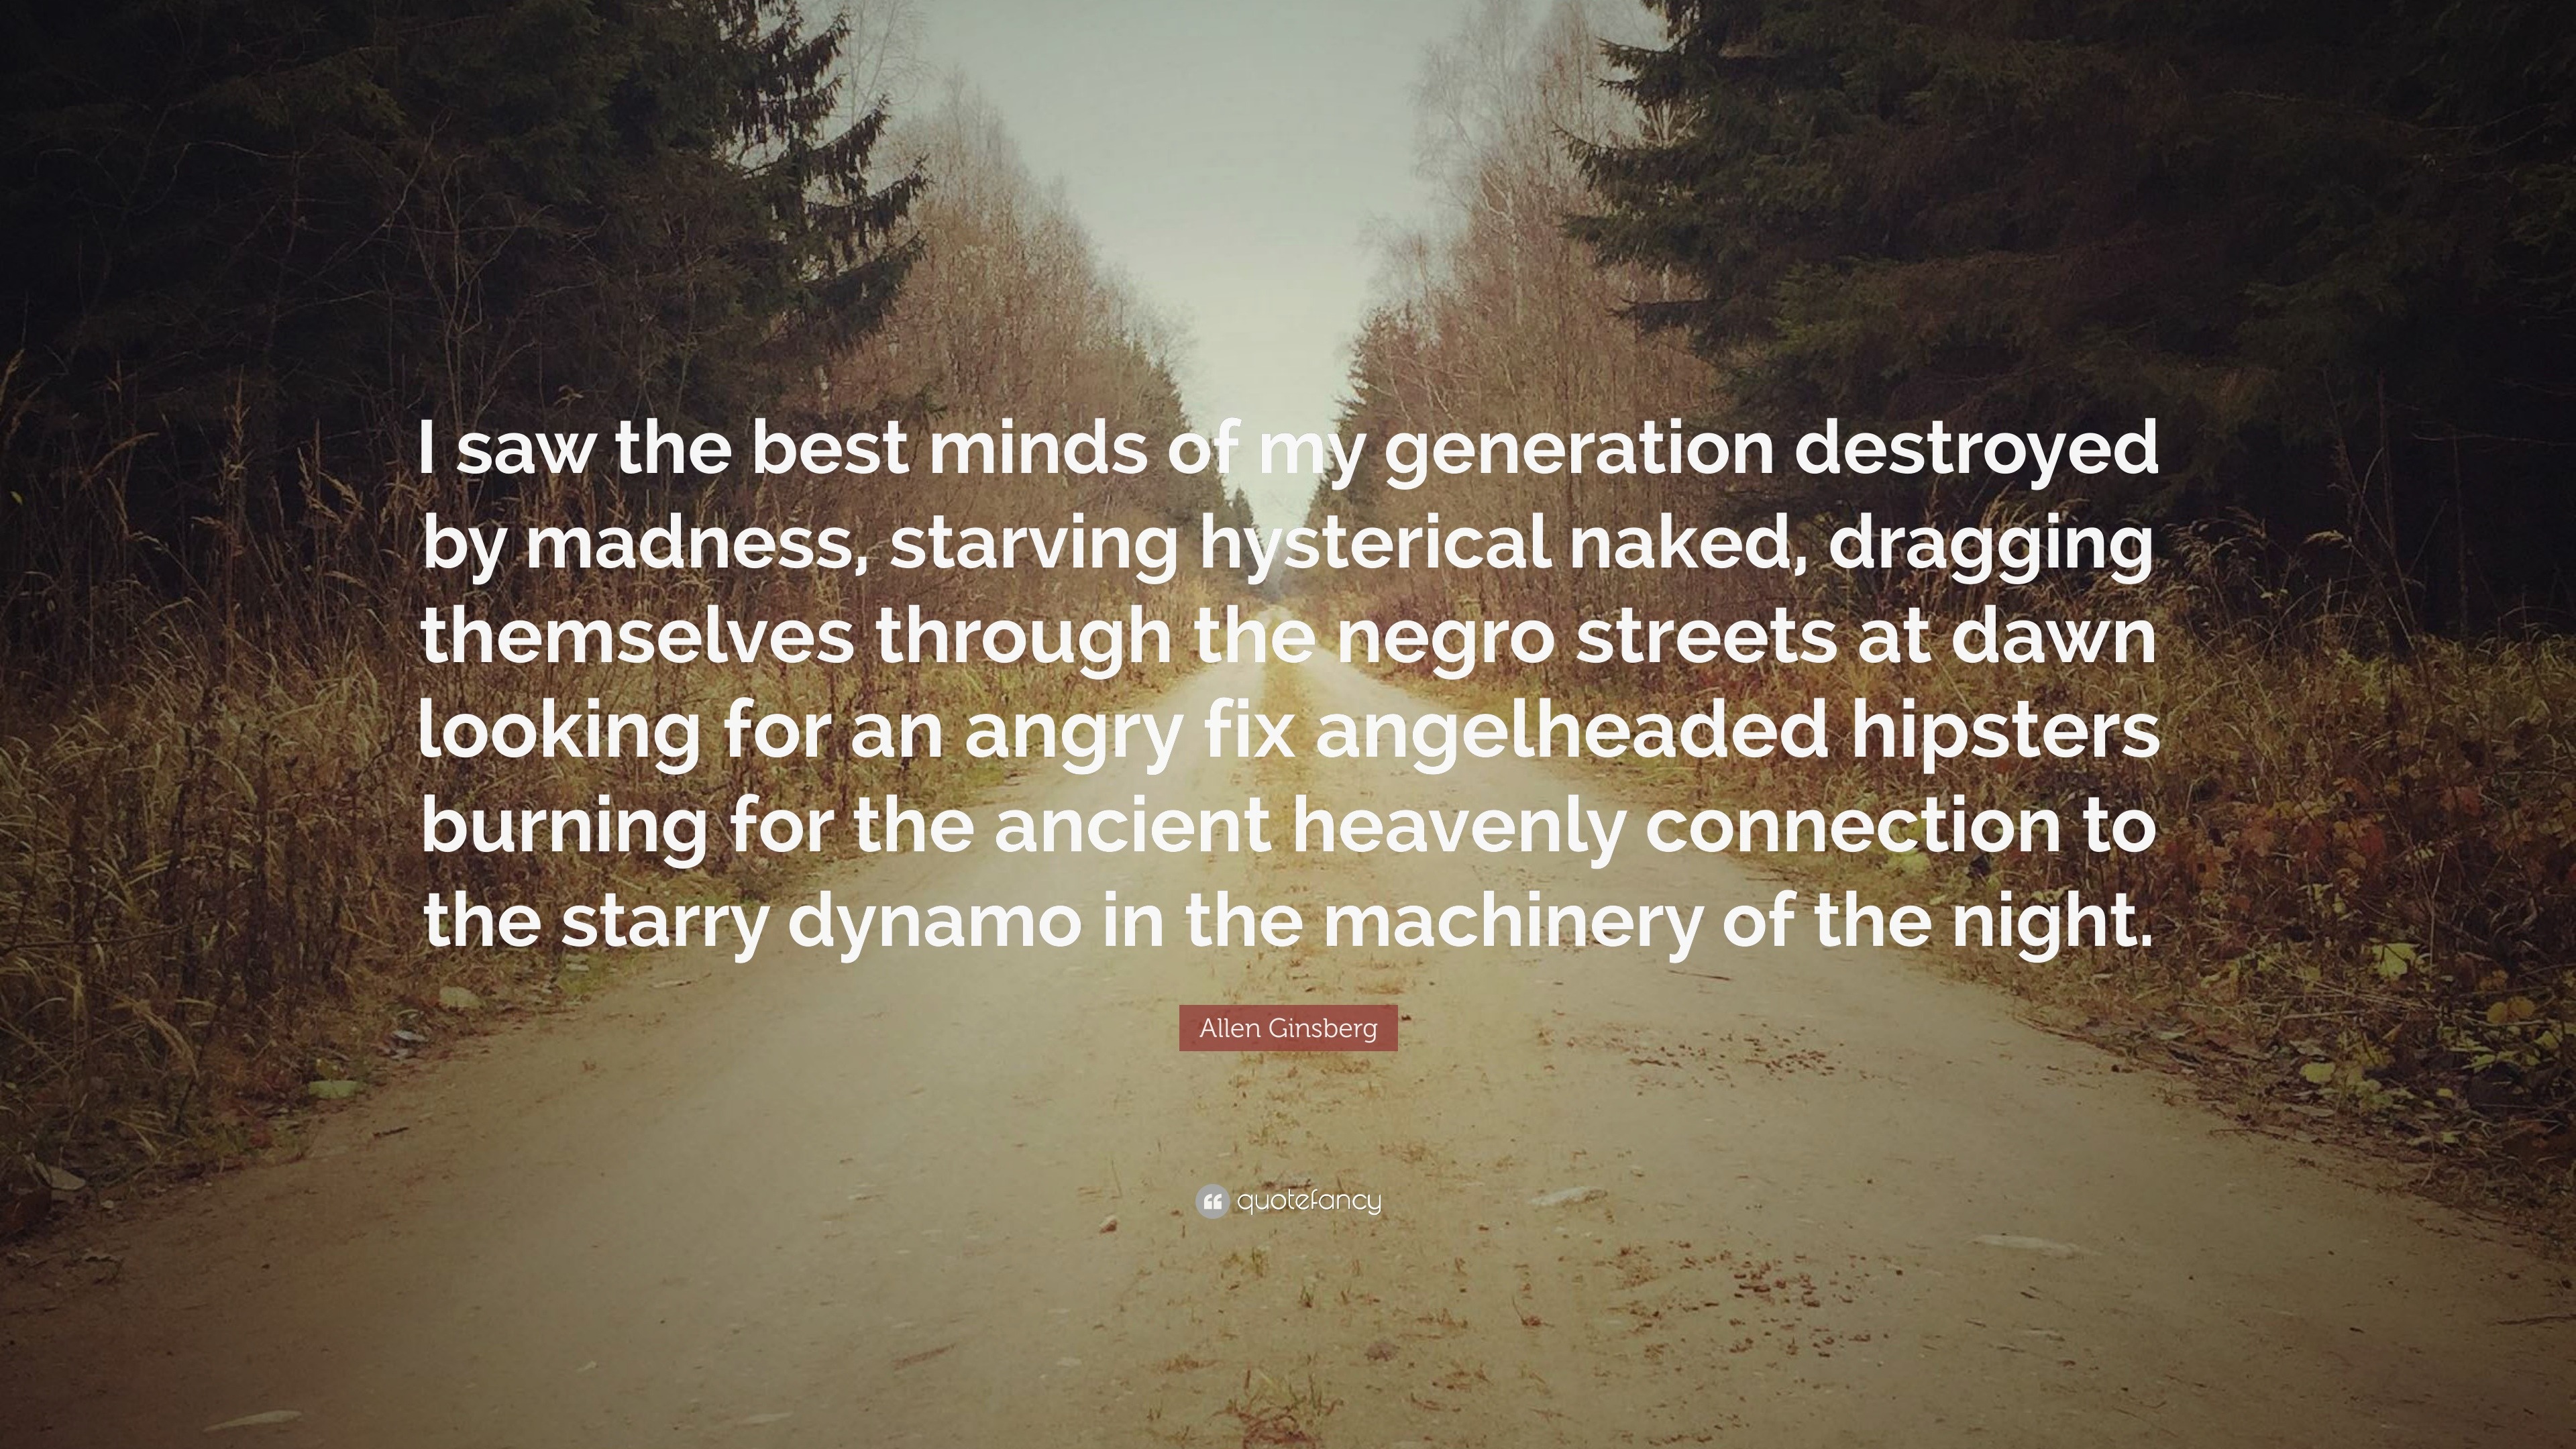 Allen Ginsberg Quote: “I saw the best of my generation destroyed by starving naked, dragging themselves through the n...”